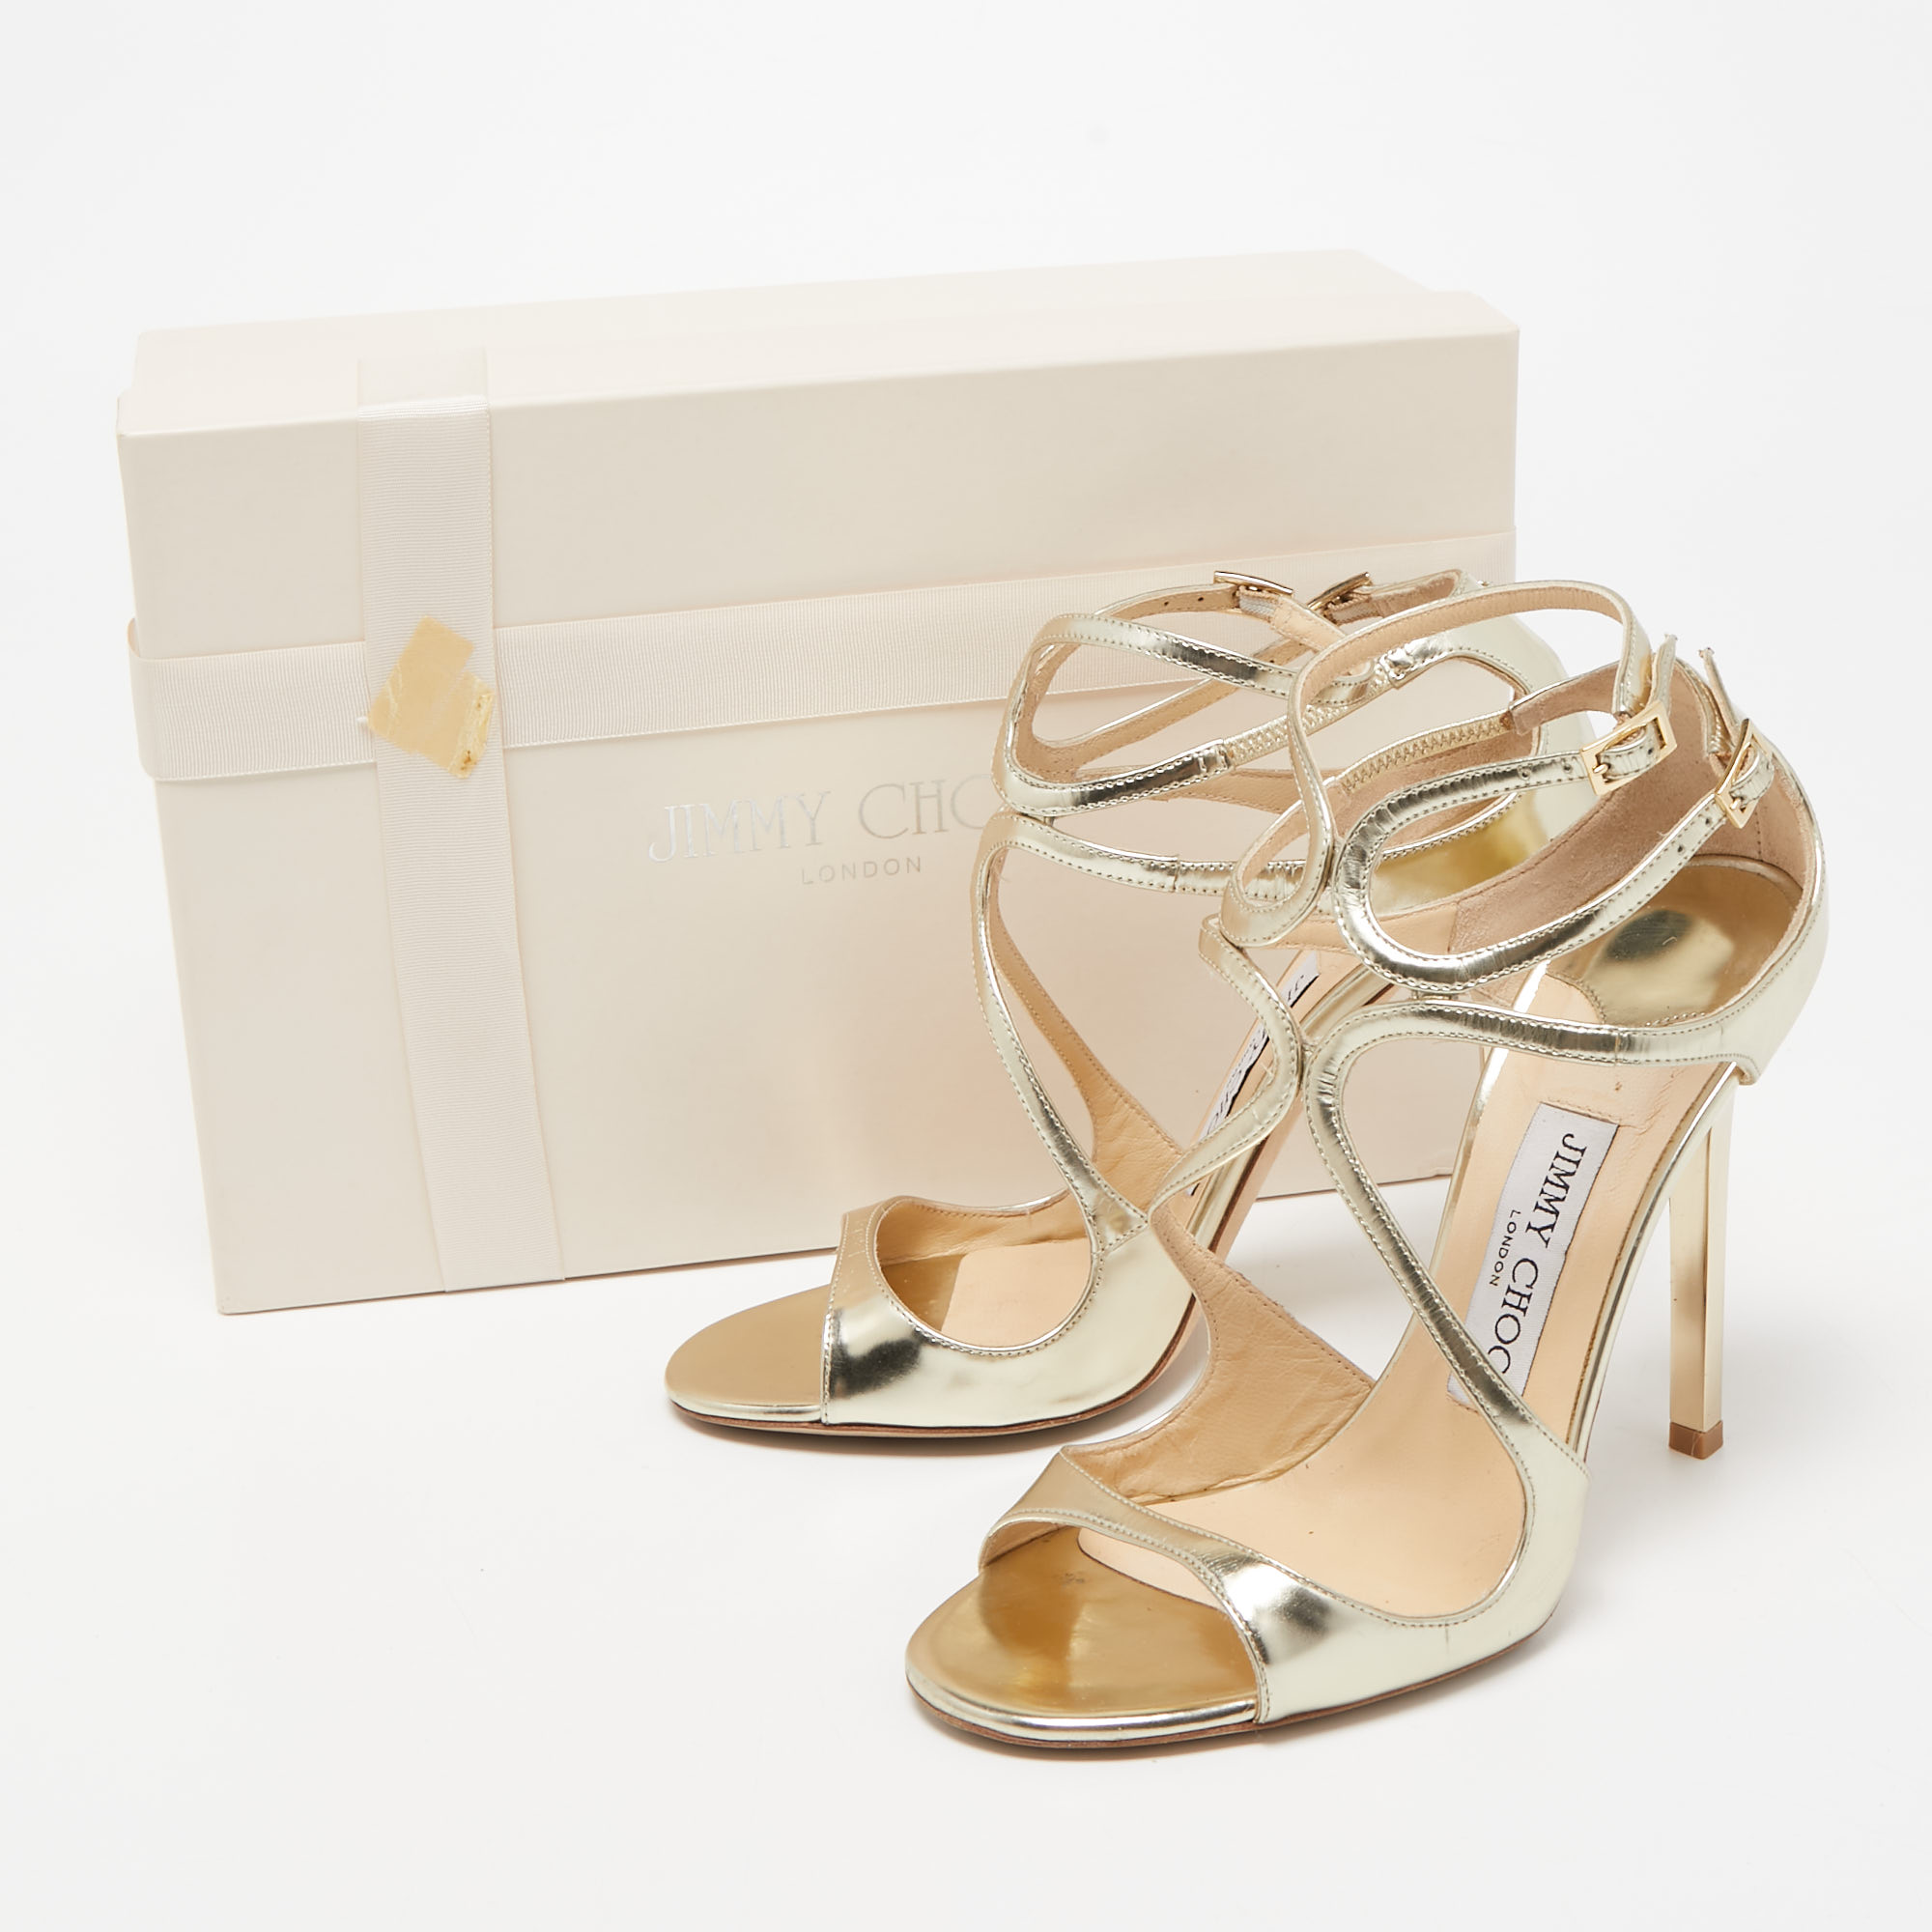 Jimmy Choo Gold Leather Ankle Strap Sandals Size 36.5